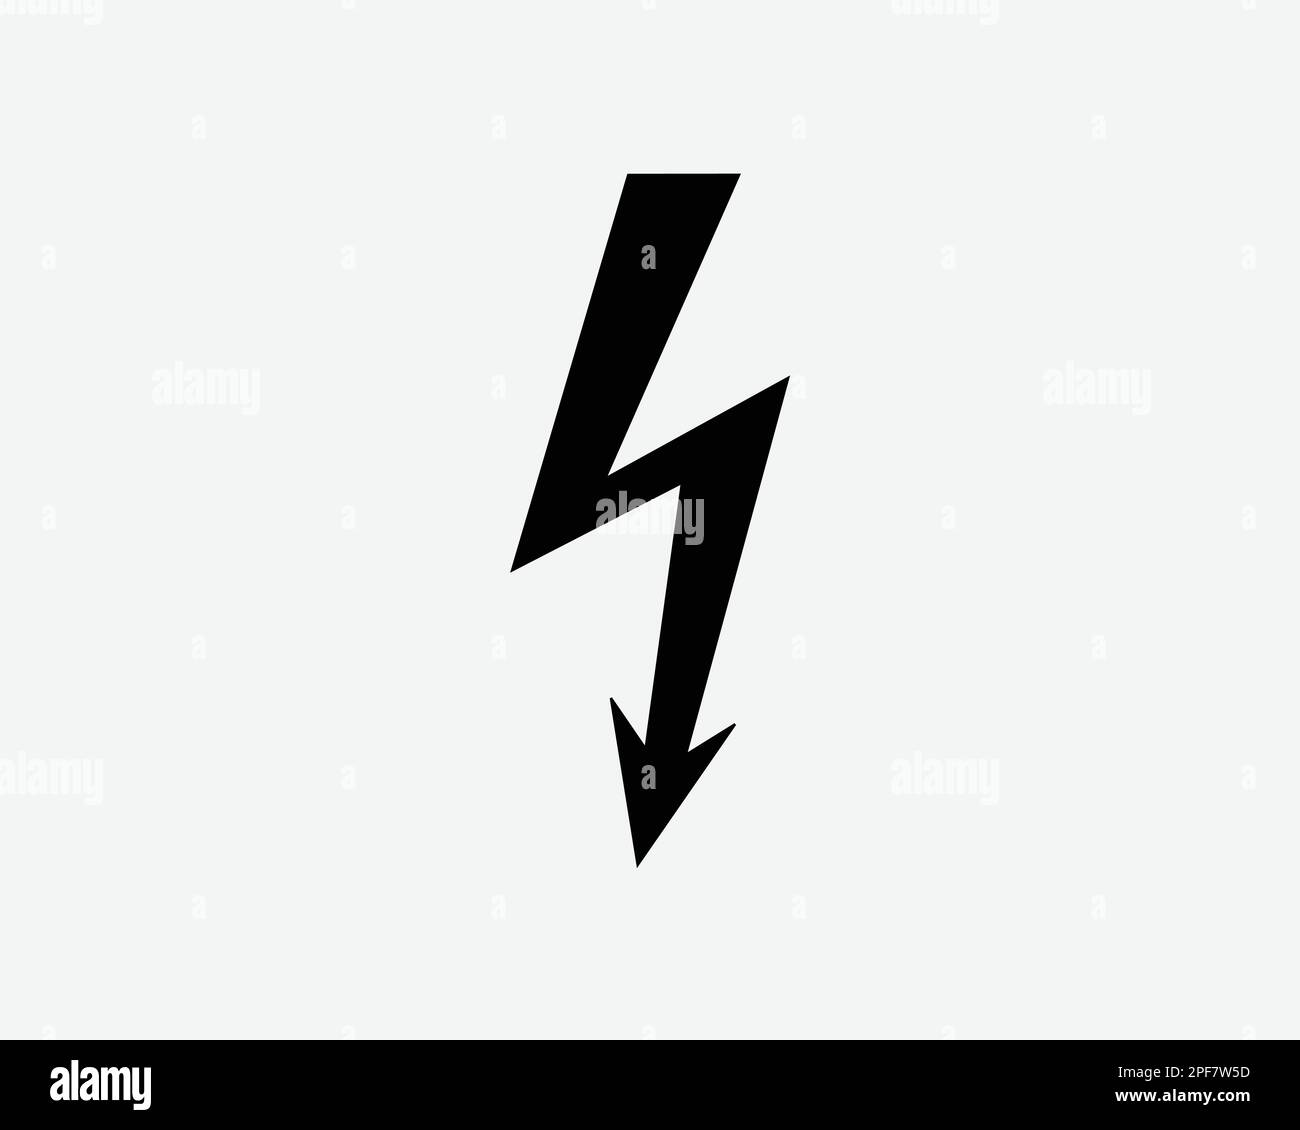 Electrical Bolt Icon Lightning Electricity Electric Static Vector Black White Silhouette Symbol Sign Graphic Clipart Artwork Illustration Pictogram Stock Vector